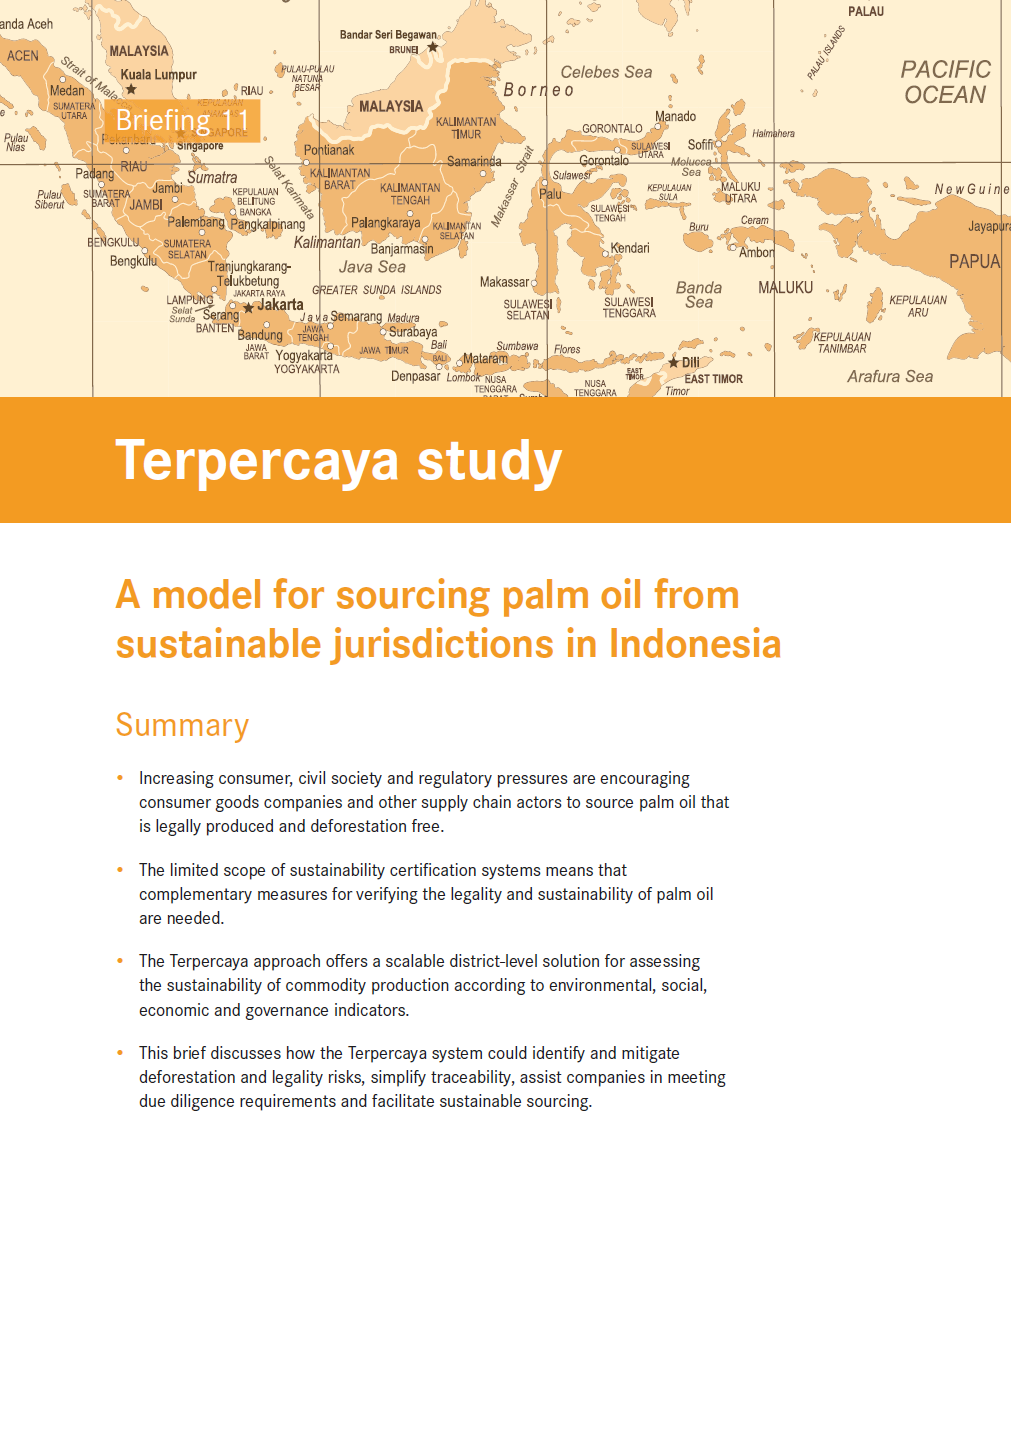 Terpercaya Study: A Model for Sourcing Palm Oil from Sustainable Jurisdictions in Indonesia